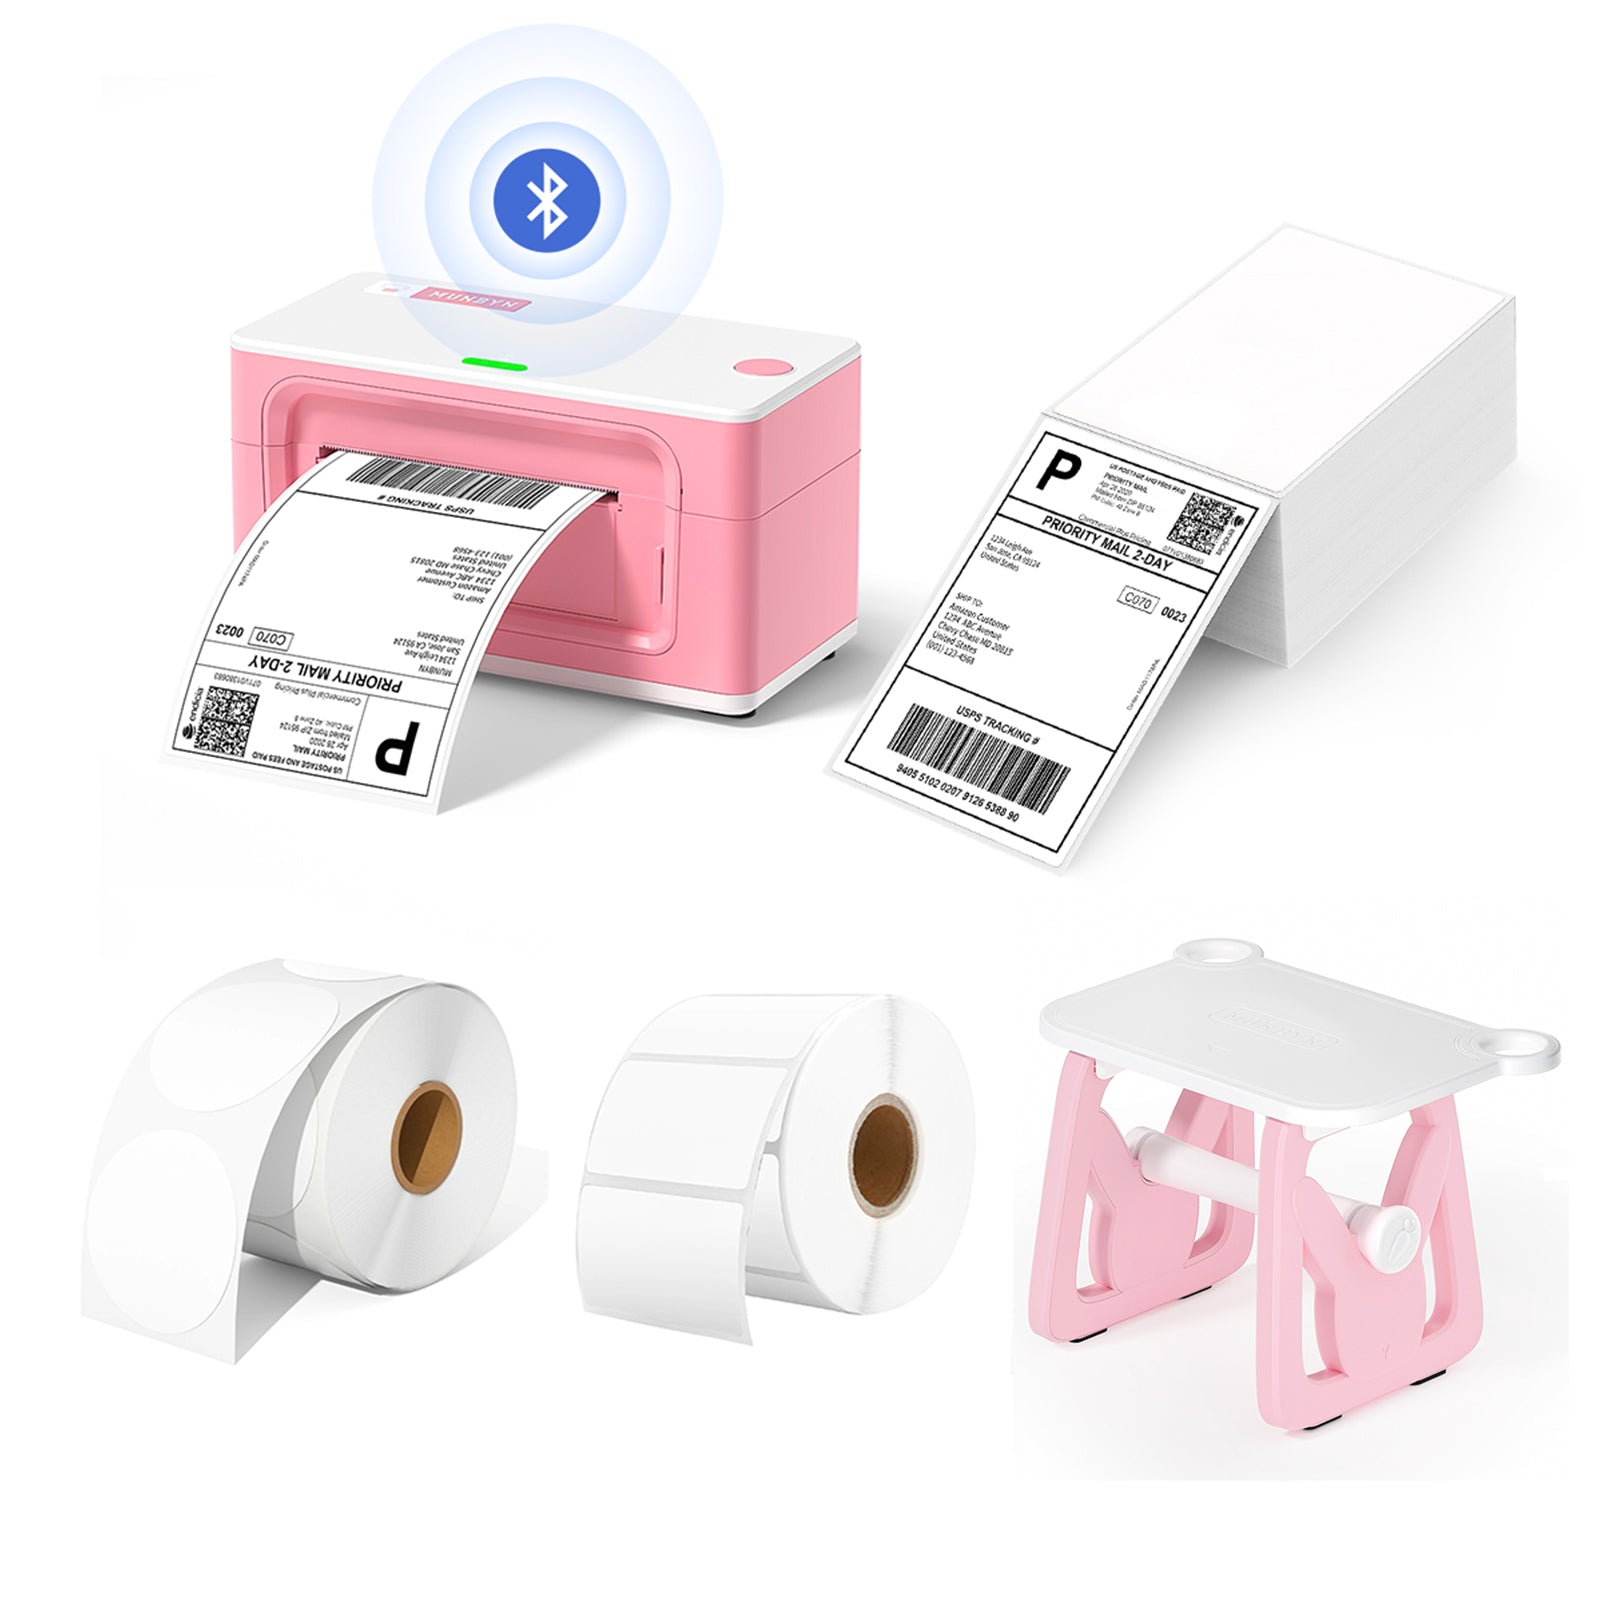 The bundle includes a Bluetooth thermal printer, a multifunctional MUNBYN pink label holder, a stack of shipping labels, and two rolls of thermal labels.